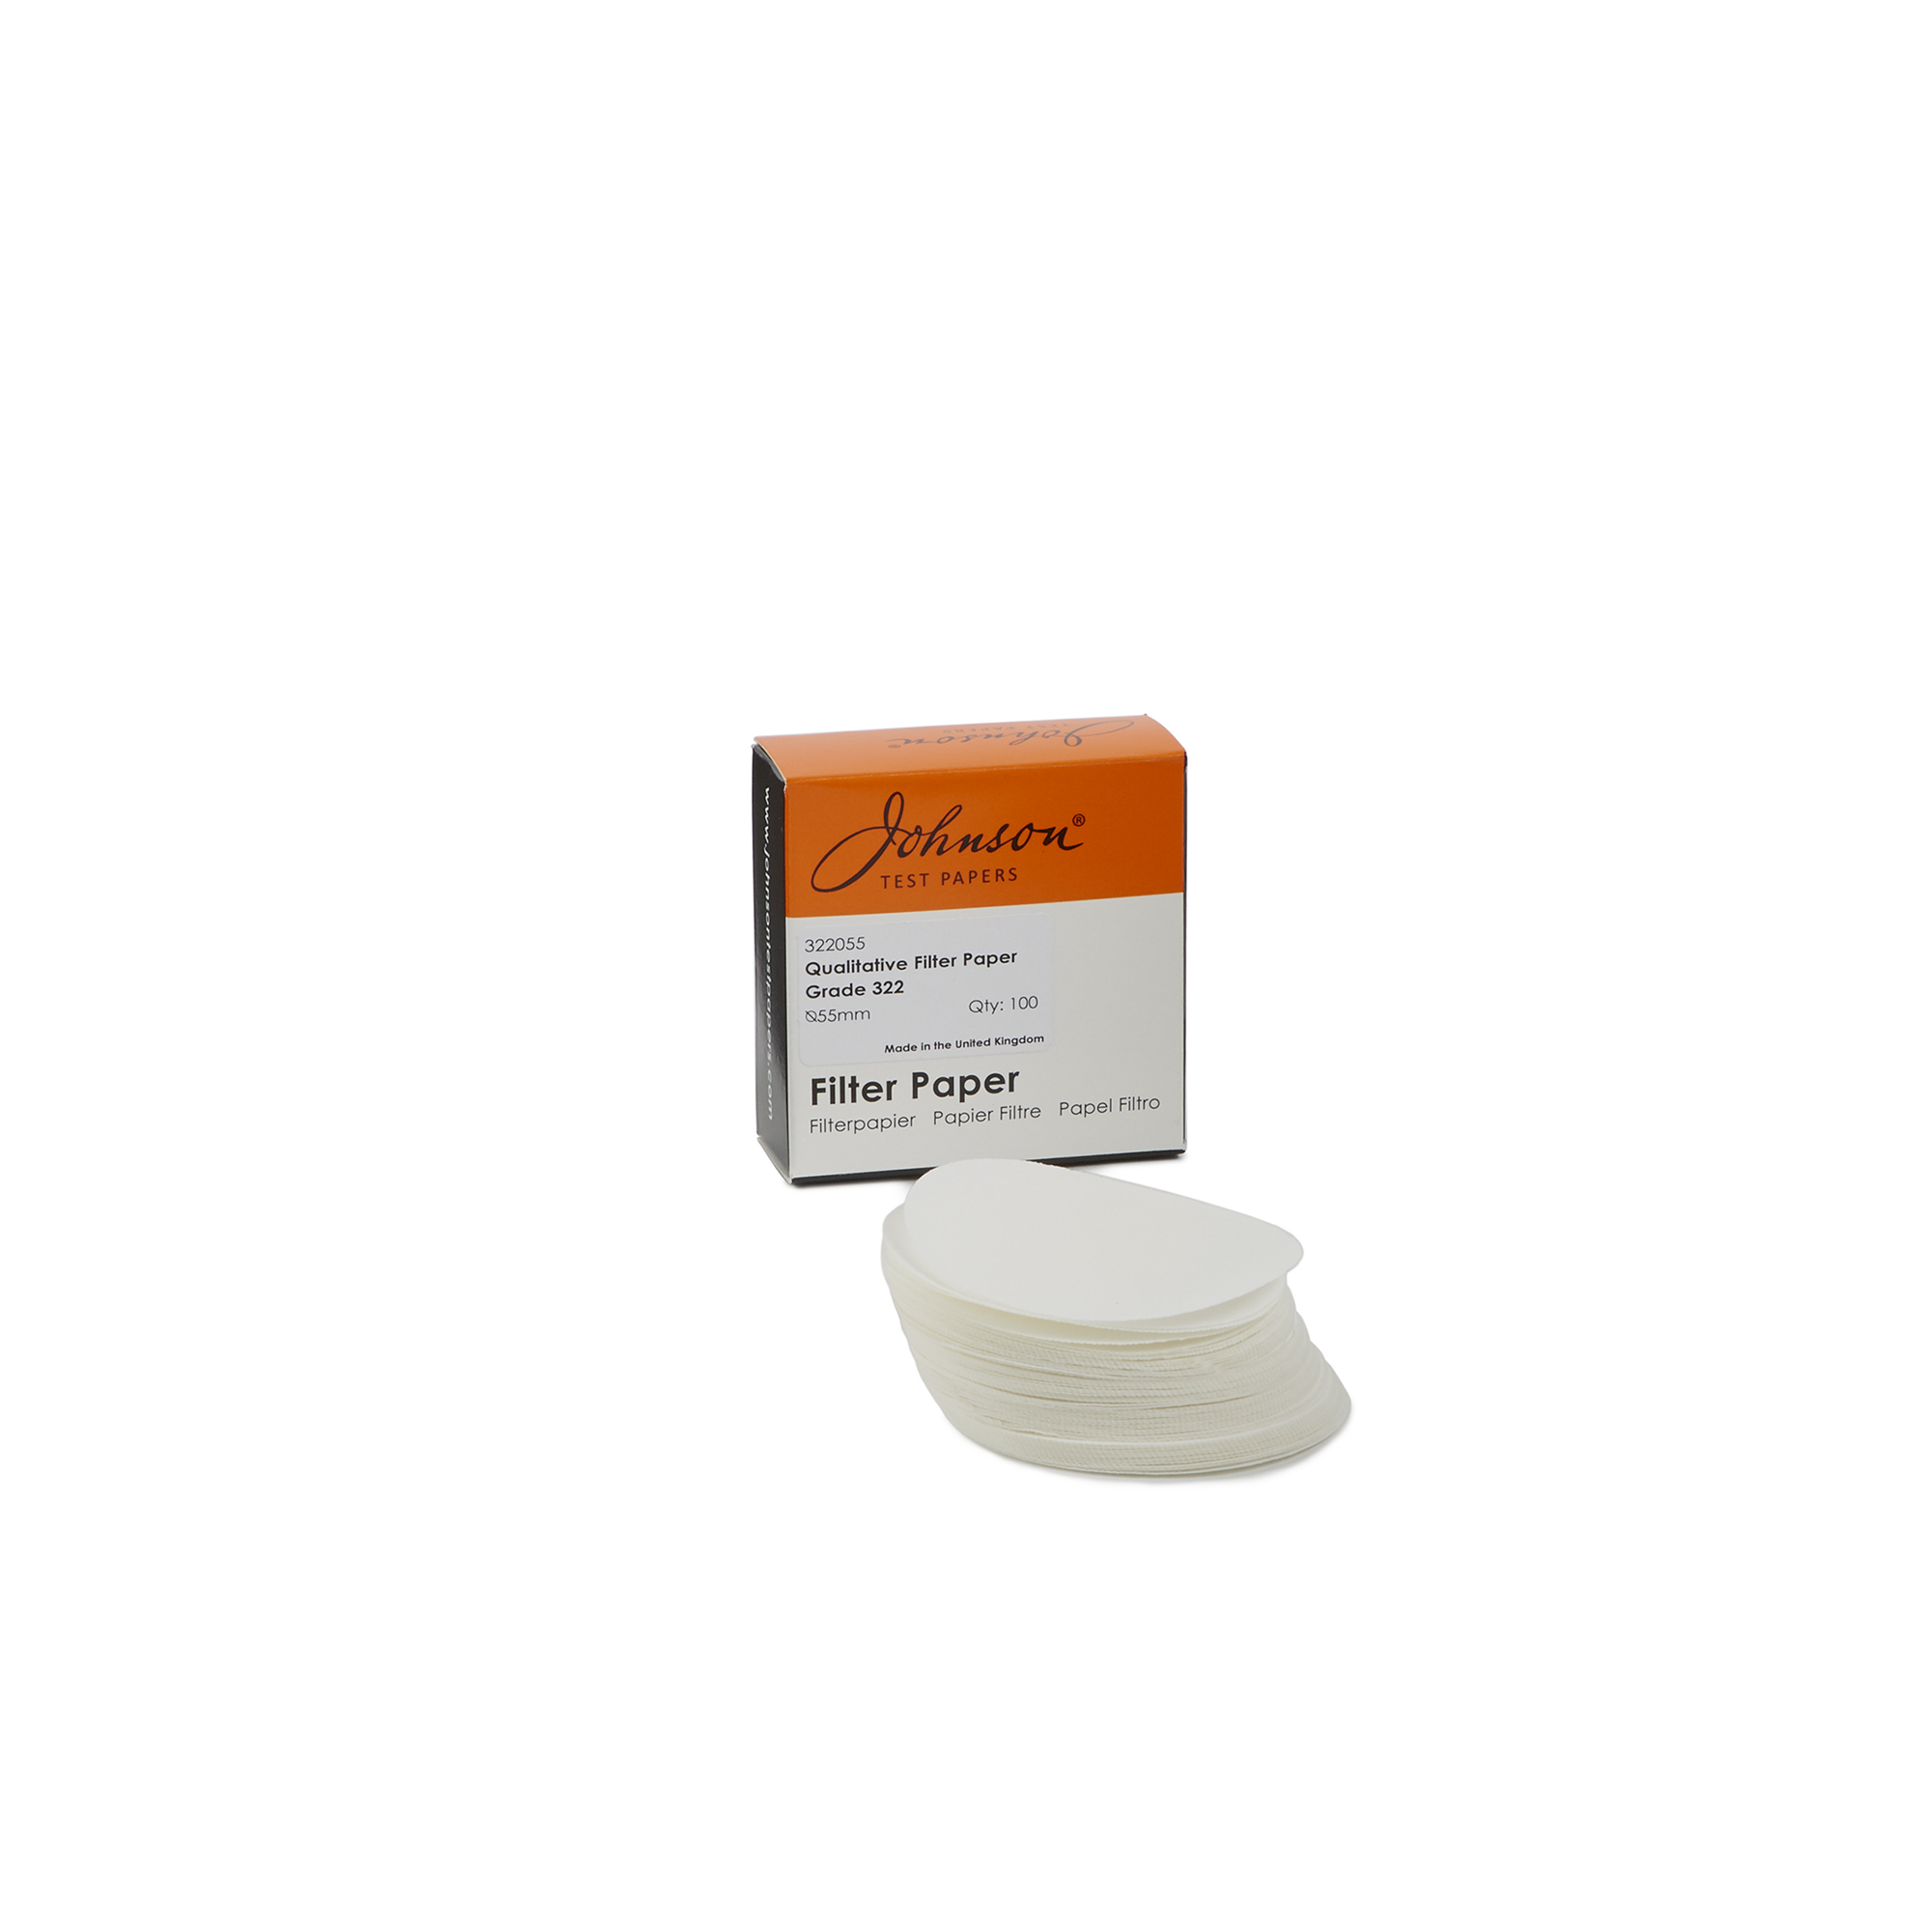 Wet-strengthened Fast Filter Papers 55mm